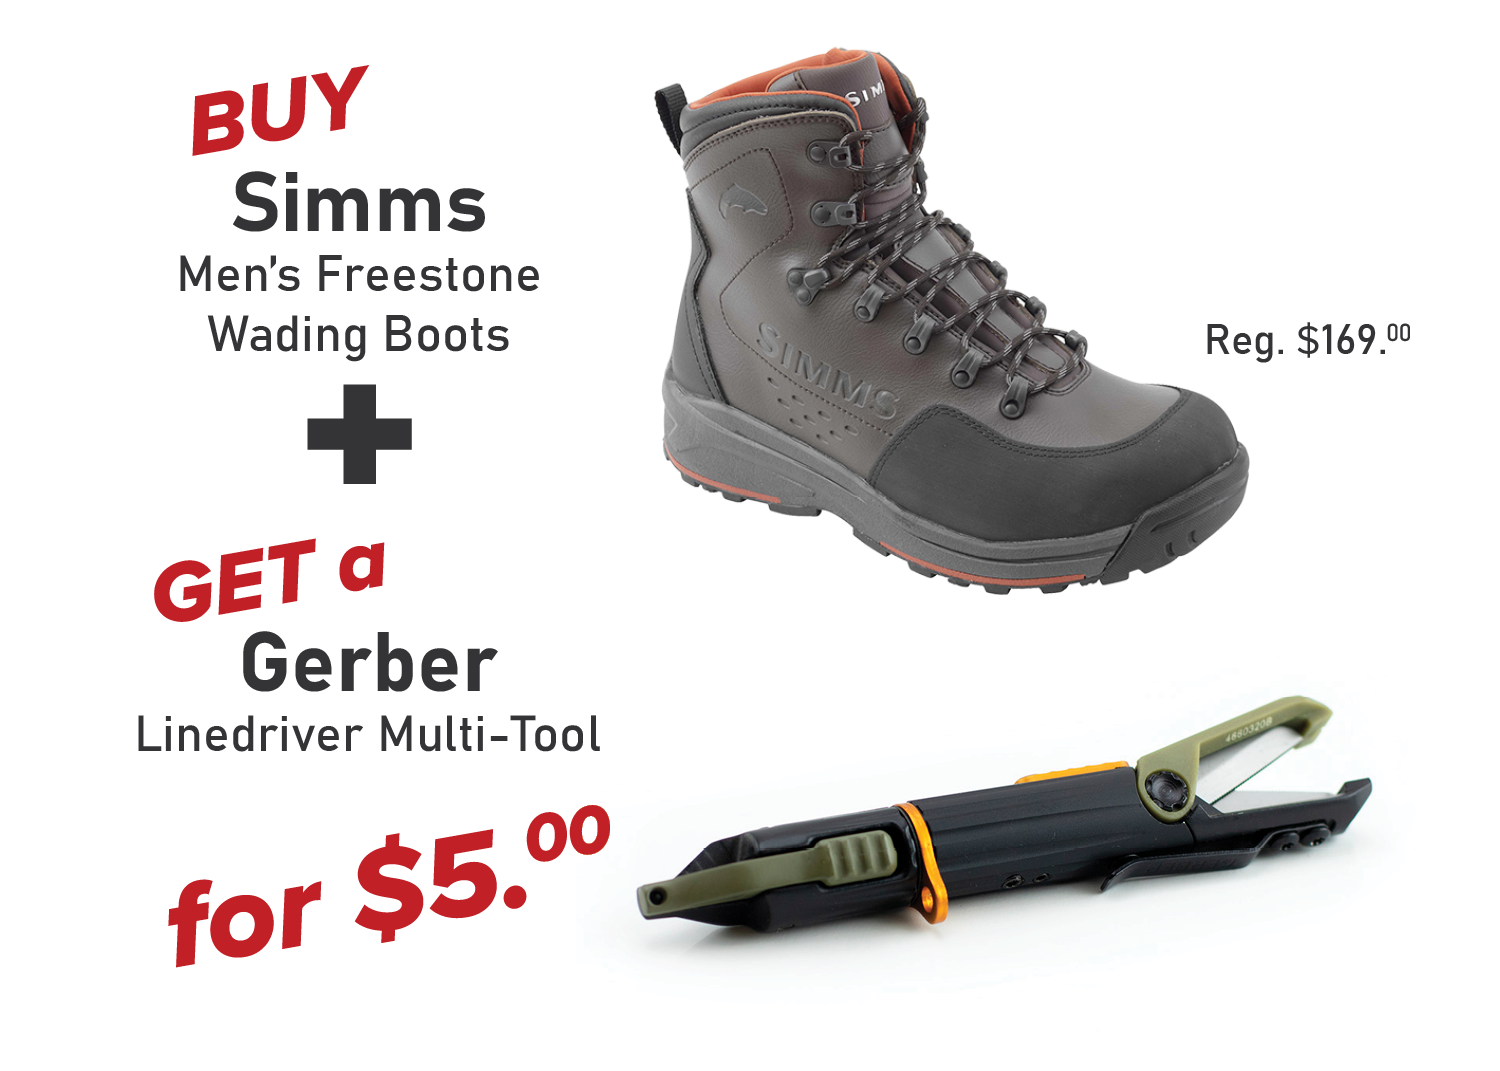 Buy Simms Men's Freestone Wading Boots & Get a Gerber Linedriver Multi-Tool for ONLY $5.00